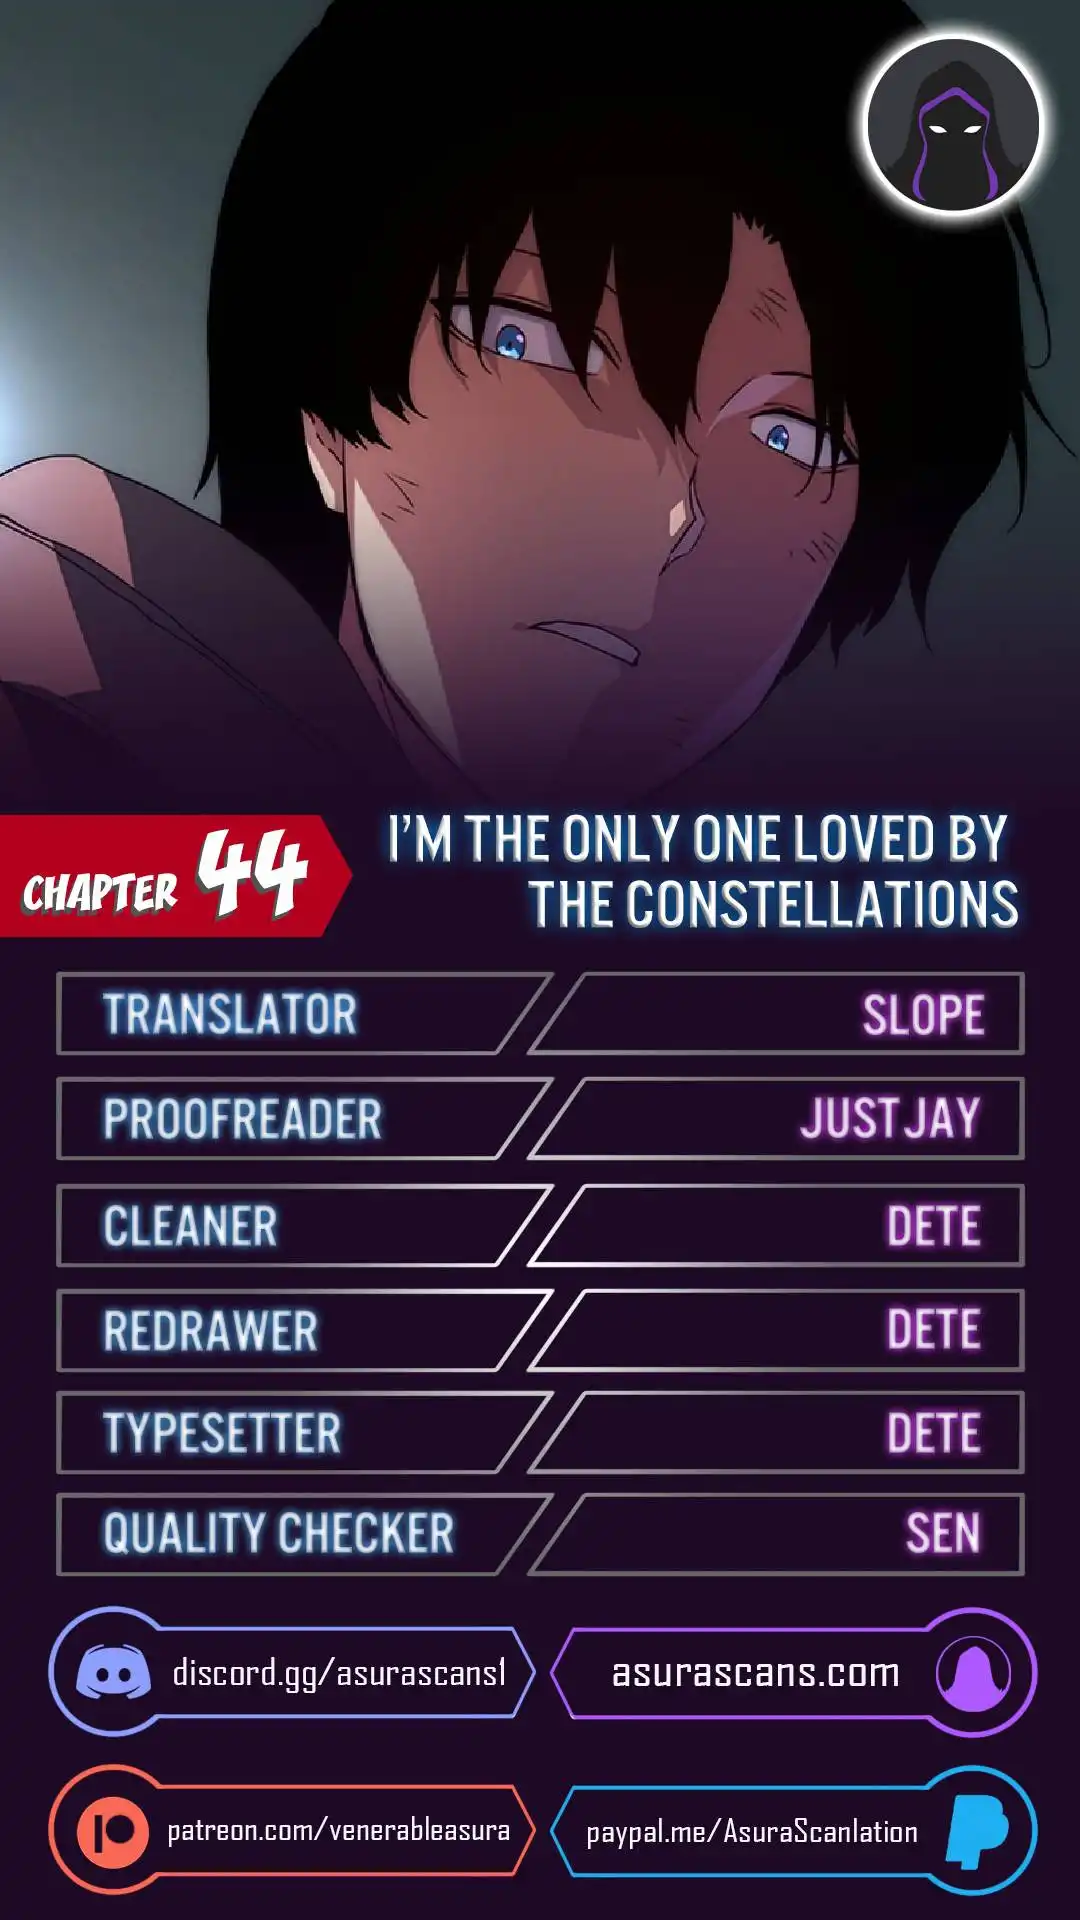 I'm the Only One Loved by the Constellations! Chapter 44